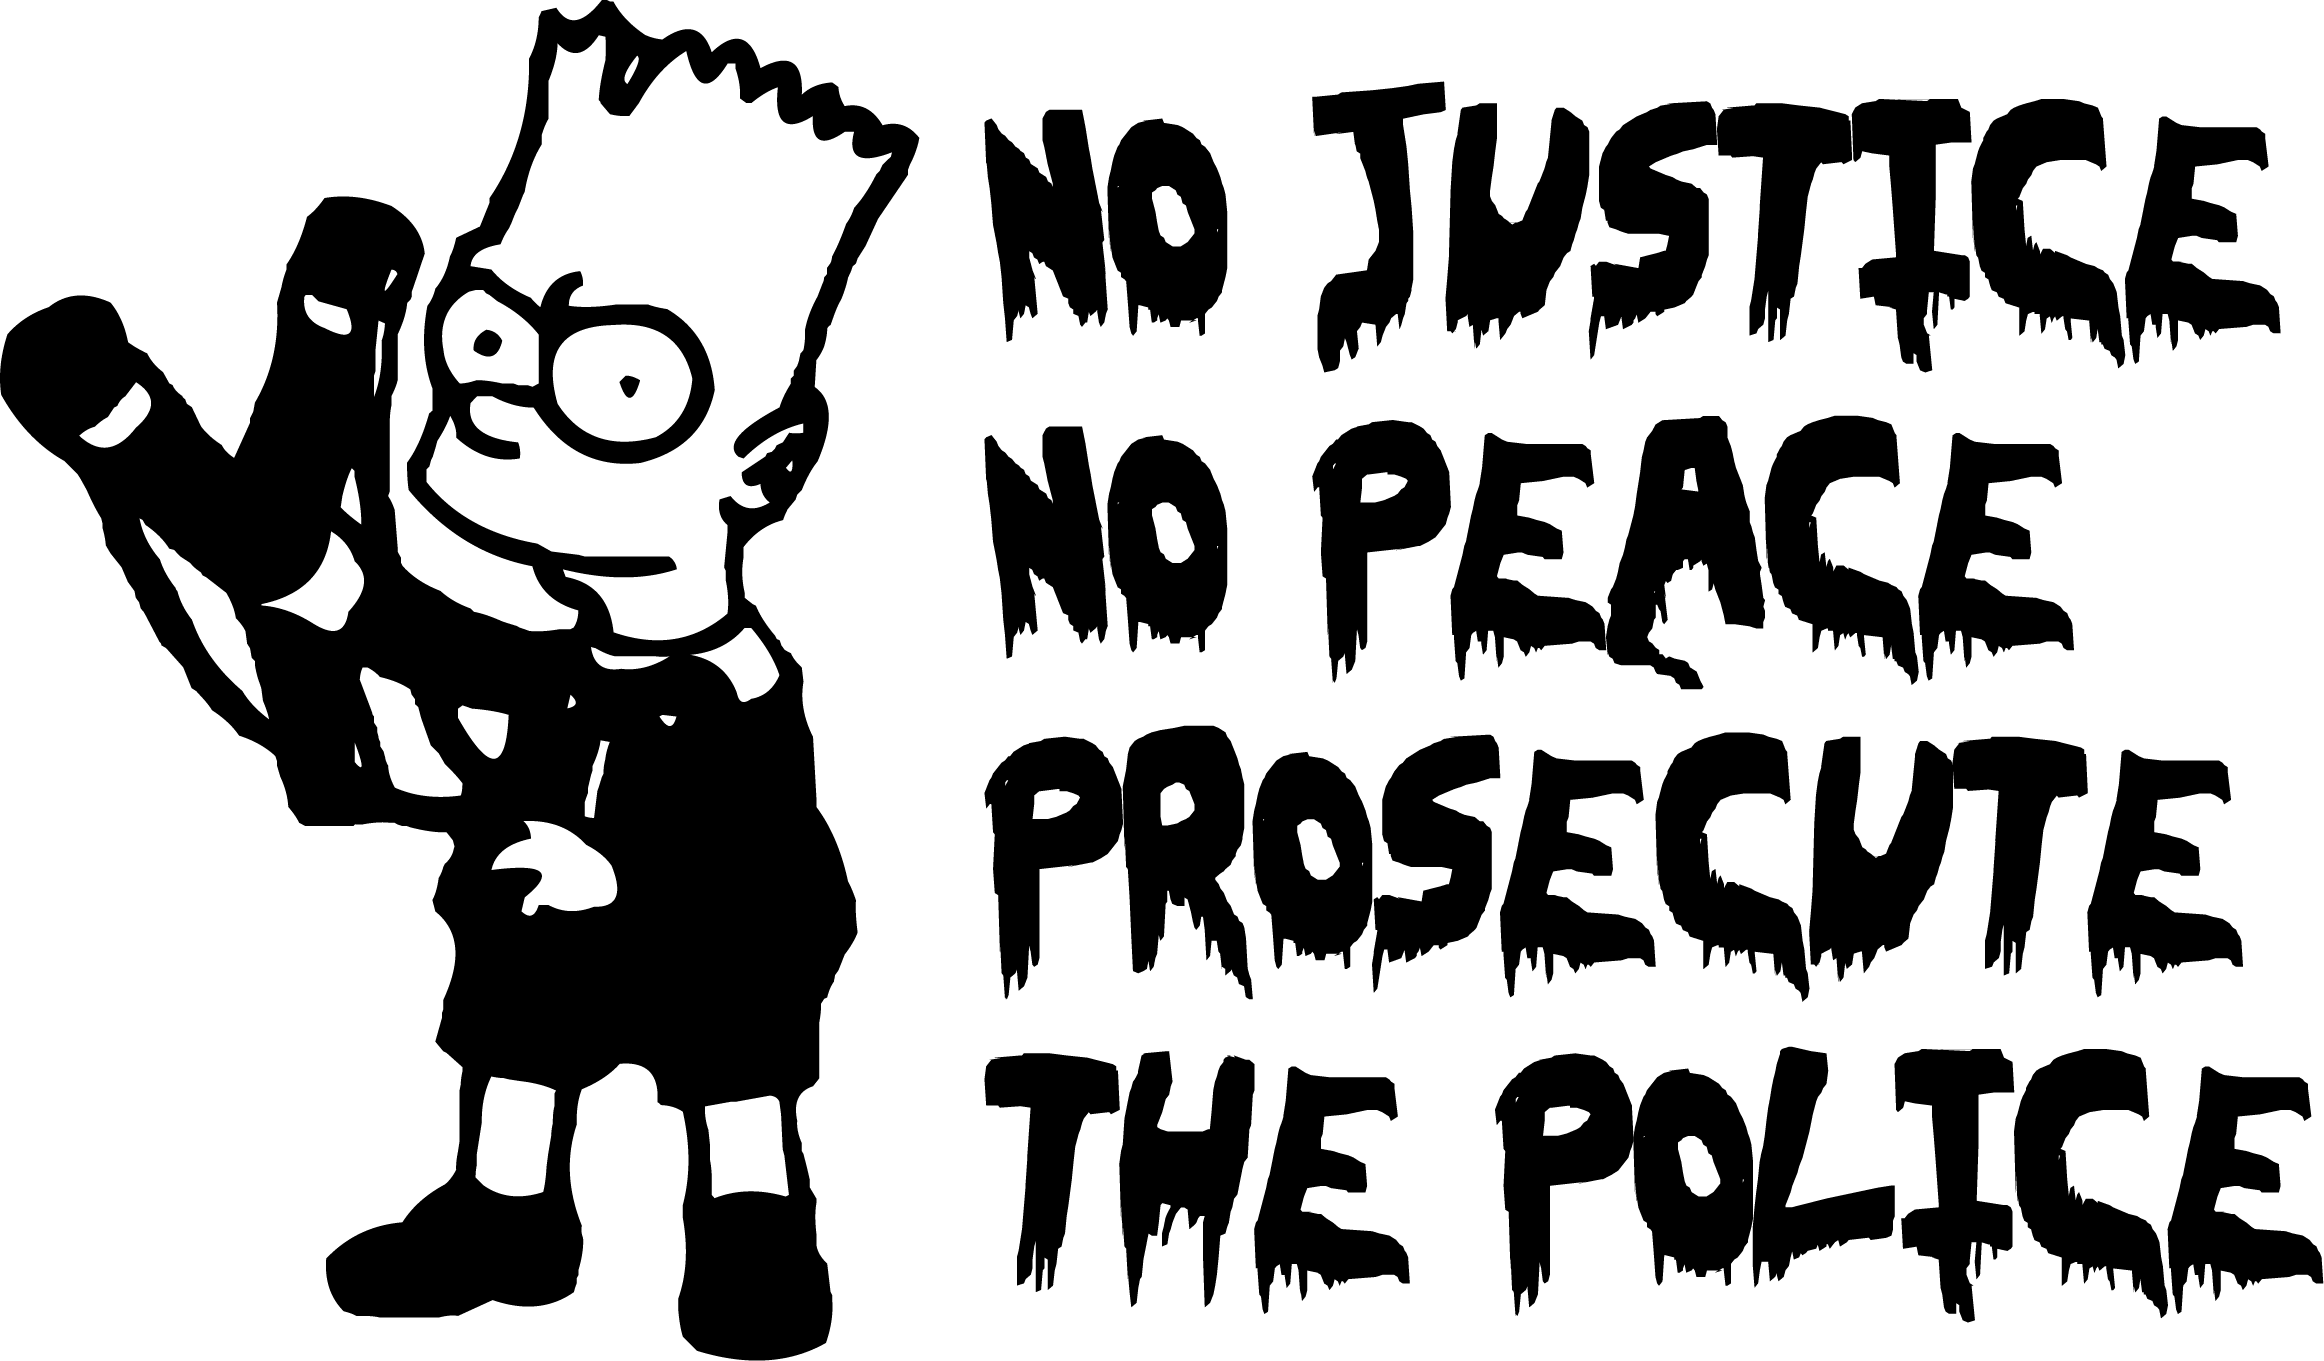 prosecute the police-01-01